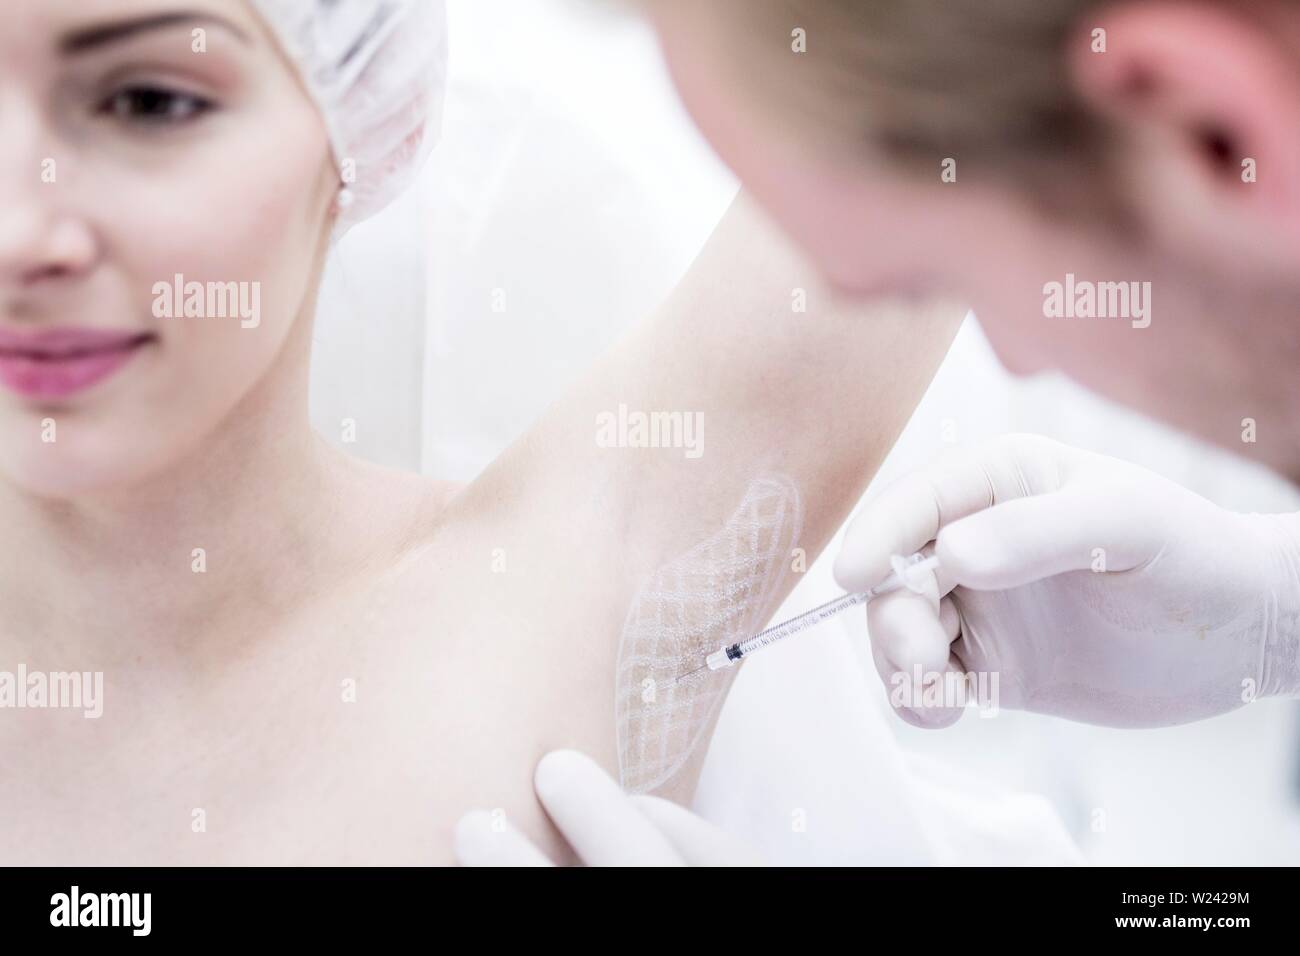 Dermatologist injecting botox in underarm to treat excessive sweating, close-up. Stock Photo